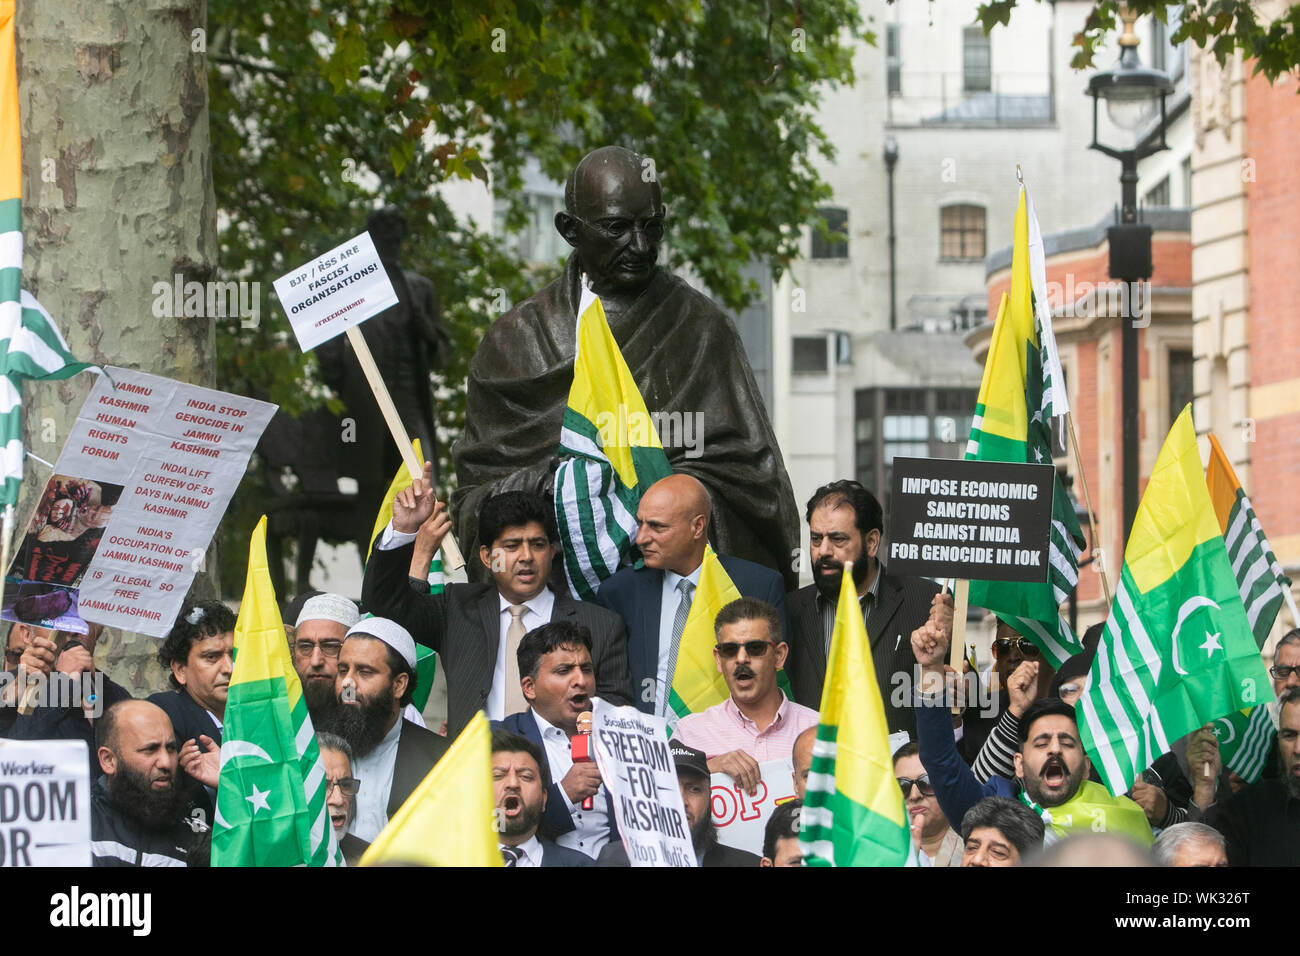 London, UK. 03rd Sep, 2019. Protesters wave Kashmiri flags as they gather in Parliament Square around the statue of Gandhi in solidarity with the people of Kashmir after Indian Prime Minister Narendra Modi delivered an Independence Day speech to remove the special rights of Kashmir as an autonomous region. Credit: SOPA Images Limited/Alamy Live News Stock Photo